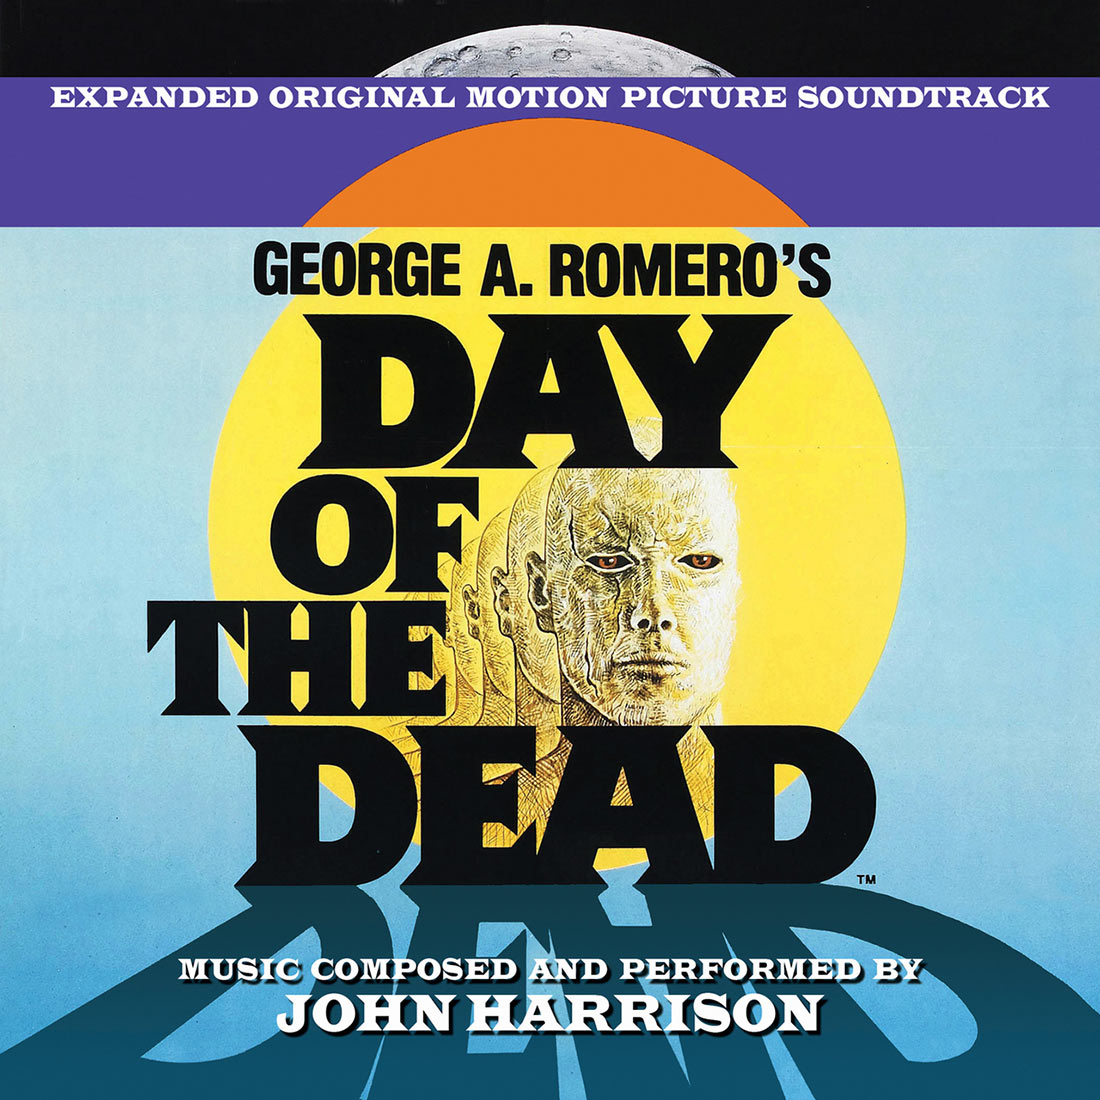 Day of the Dead Expanded Original Motion Picture Soundtrack Limited Edition 2-CD Set